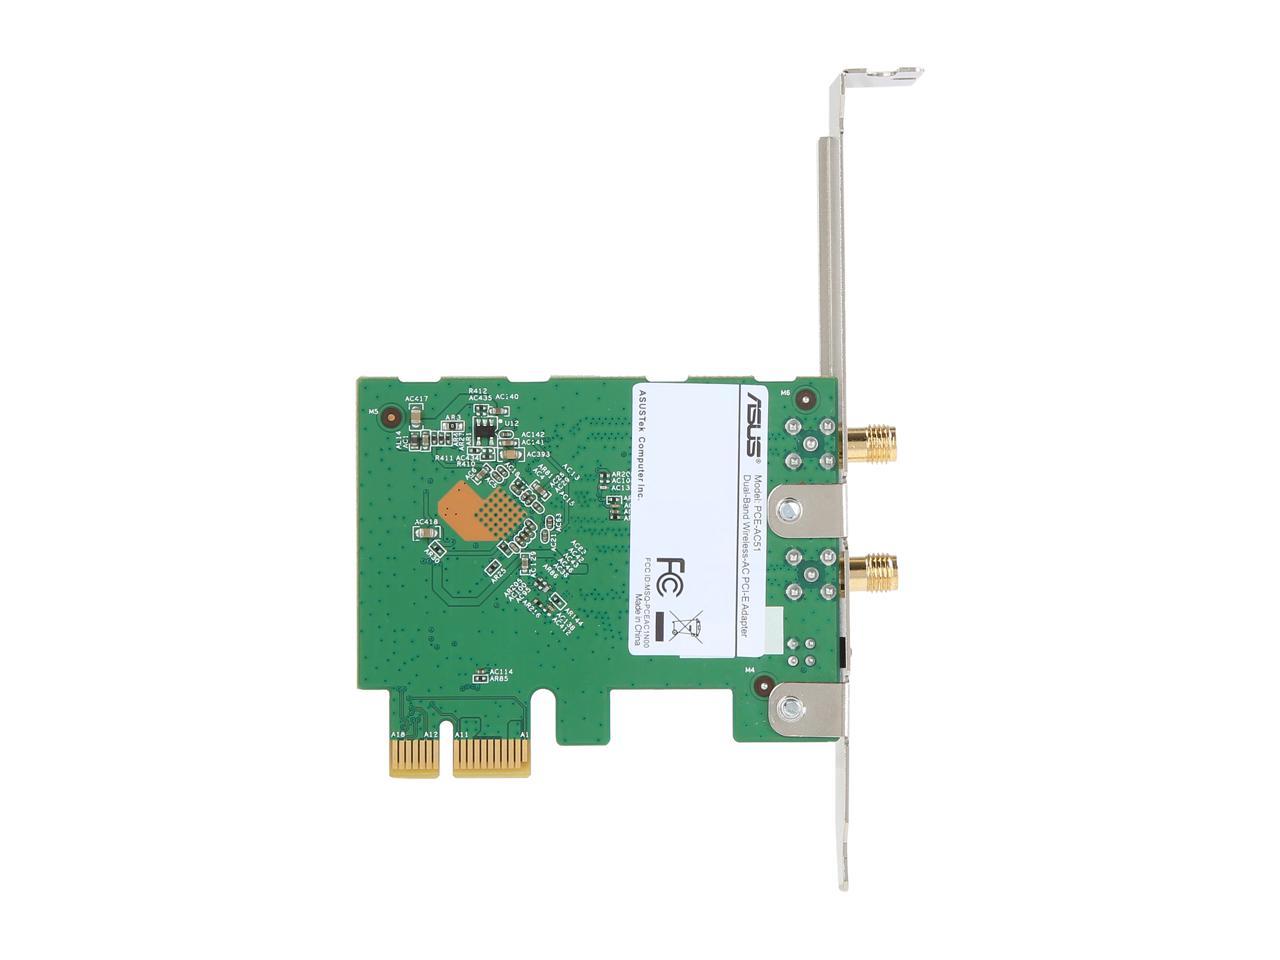 Asus Pce-Ac51 Wireless Ac750 Pcie Adapter Card For Dual-Band 2X2 802.11Ac Wifi